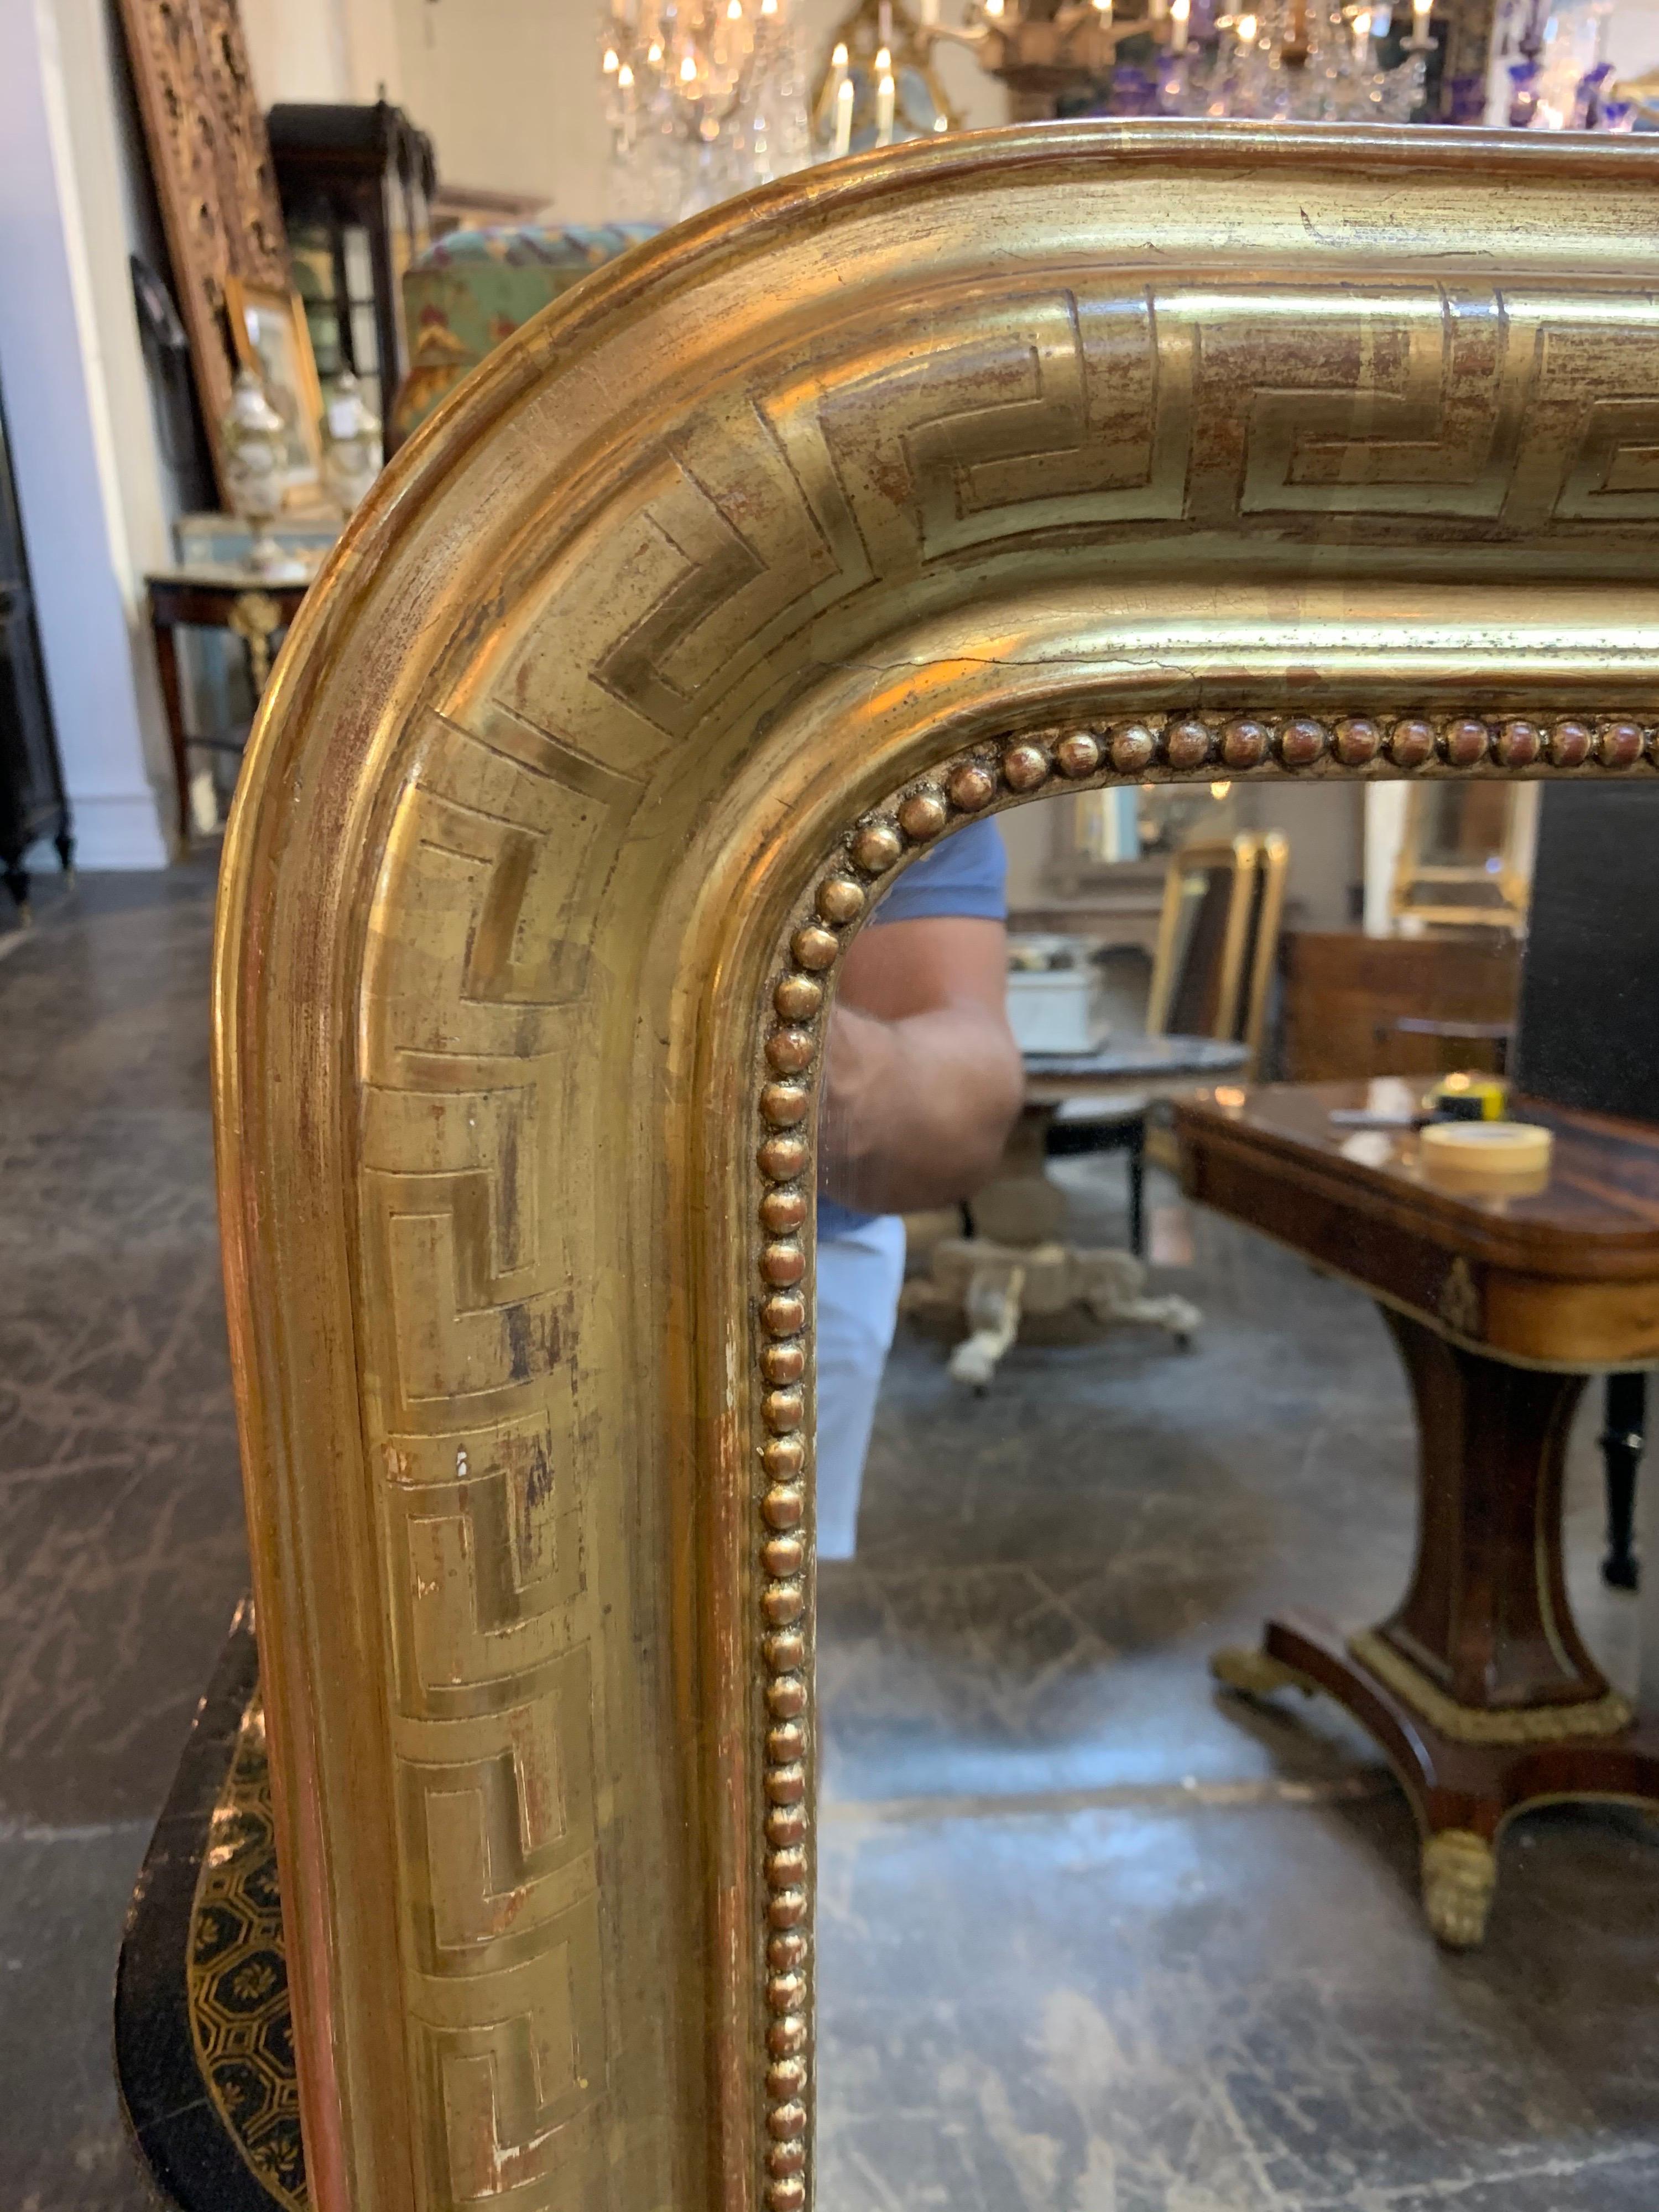 Fabulous 19th century gold Louis Philippe mirror with Greek key image. This mirror has a beautiful finish with slight red undertones and a beaded inner border. Extra special!